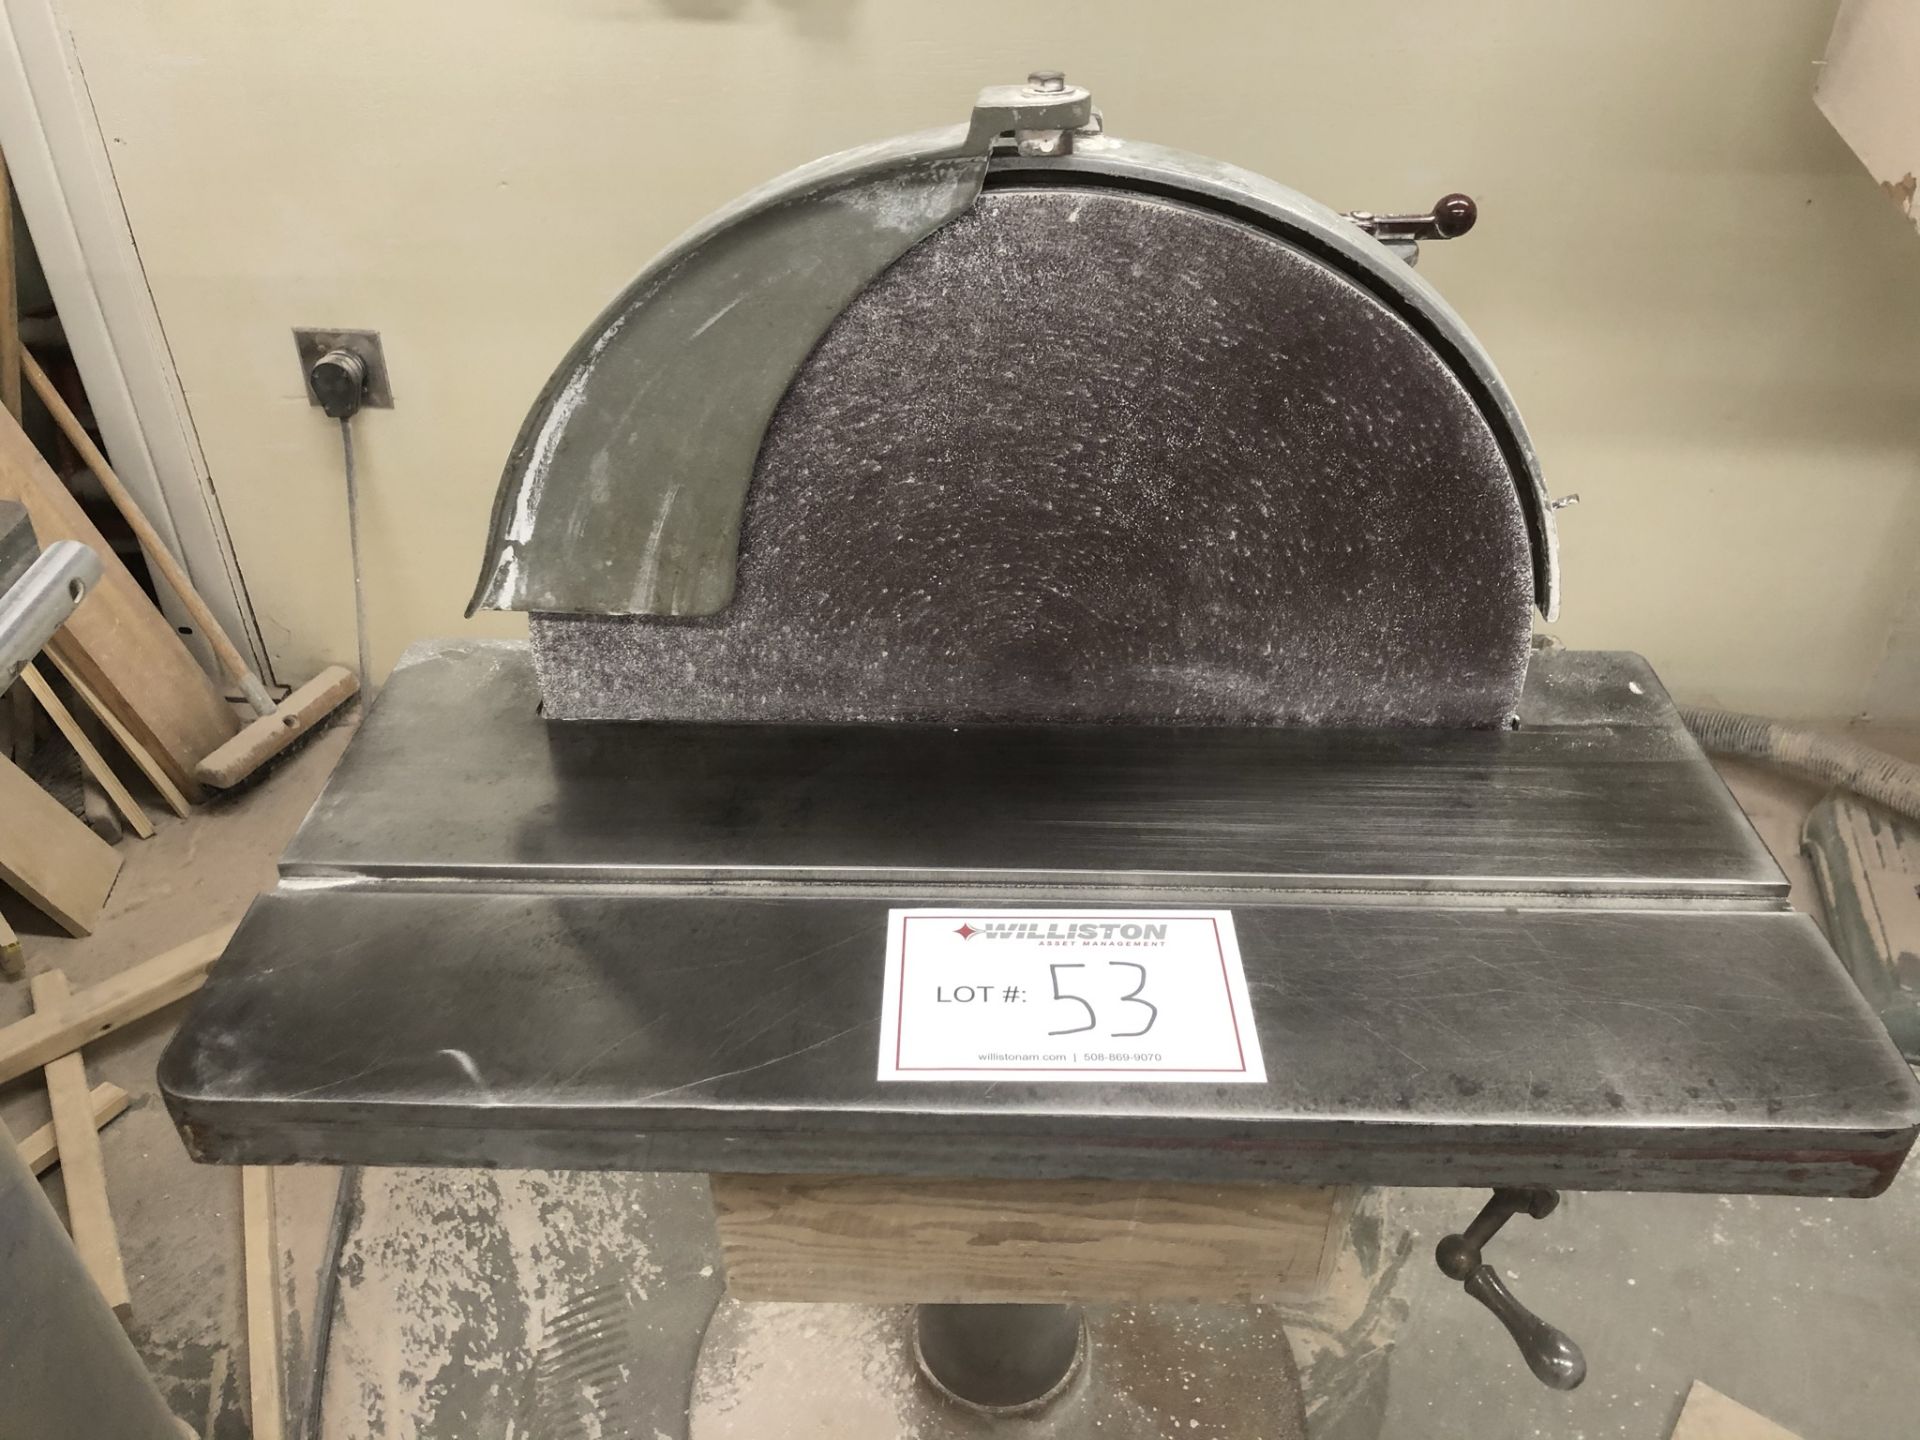 State Disc Grinder - 20” Dia. Wheel / 2HP / 10” x 27” Tilting Table